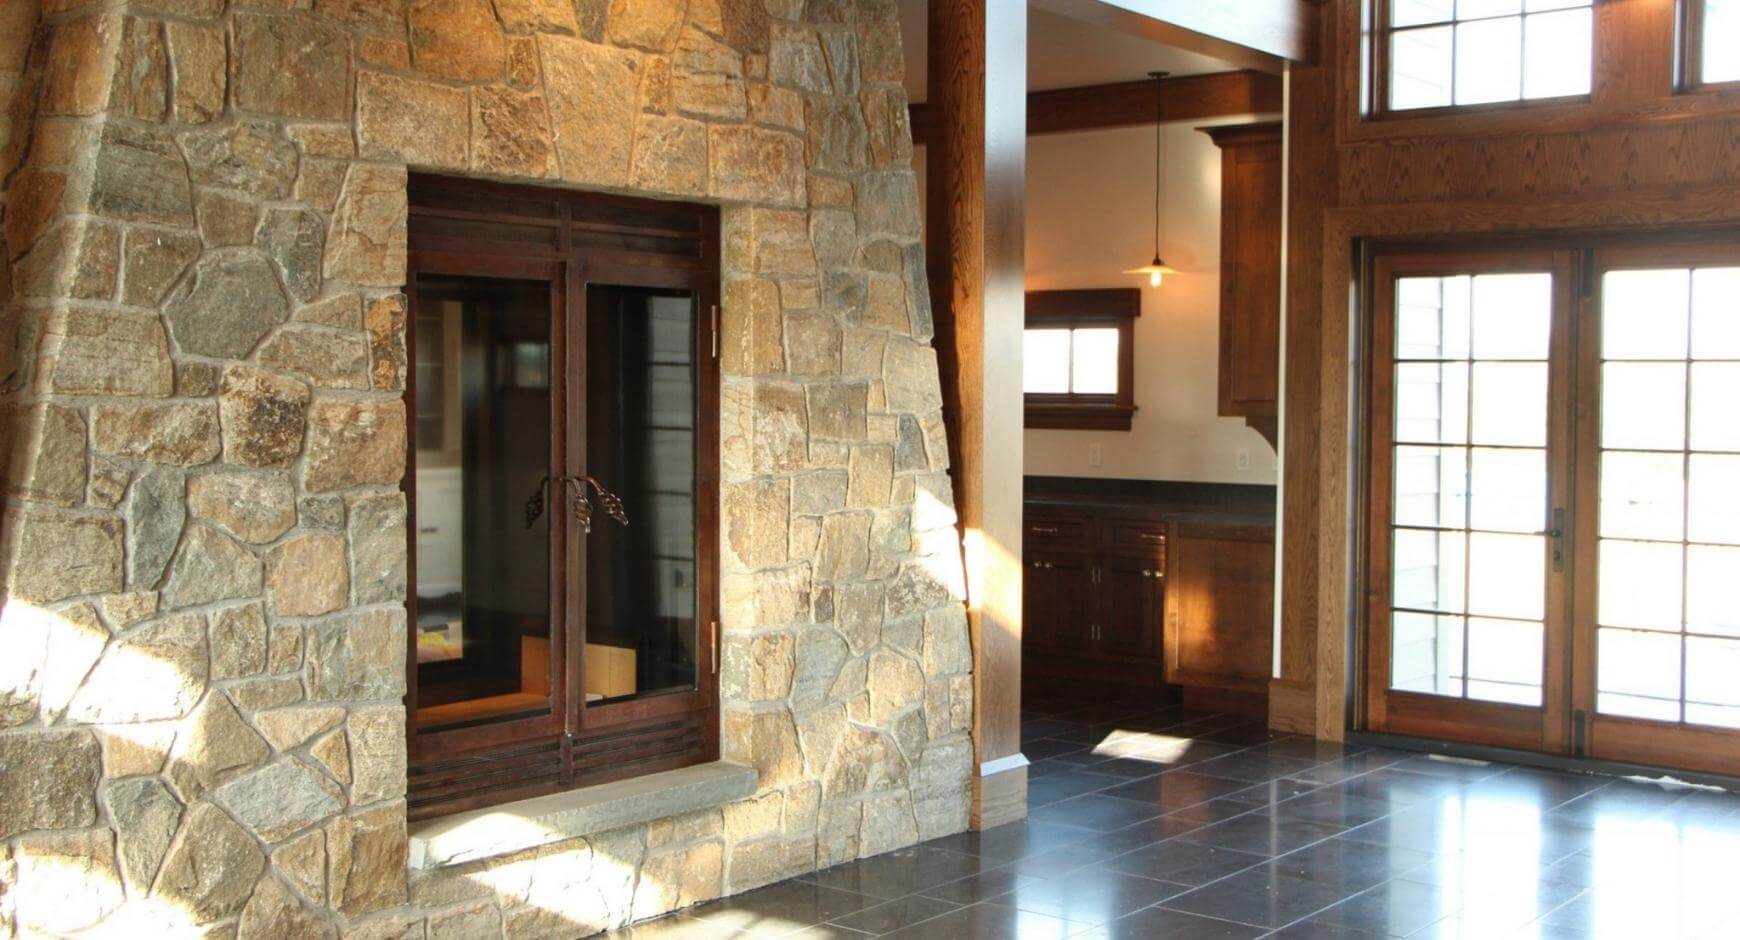 Fireplace with stone surround